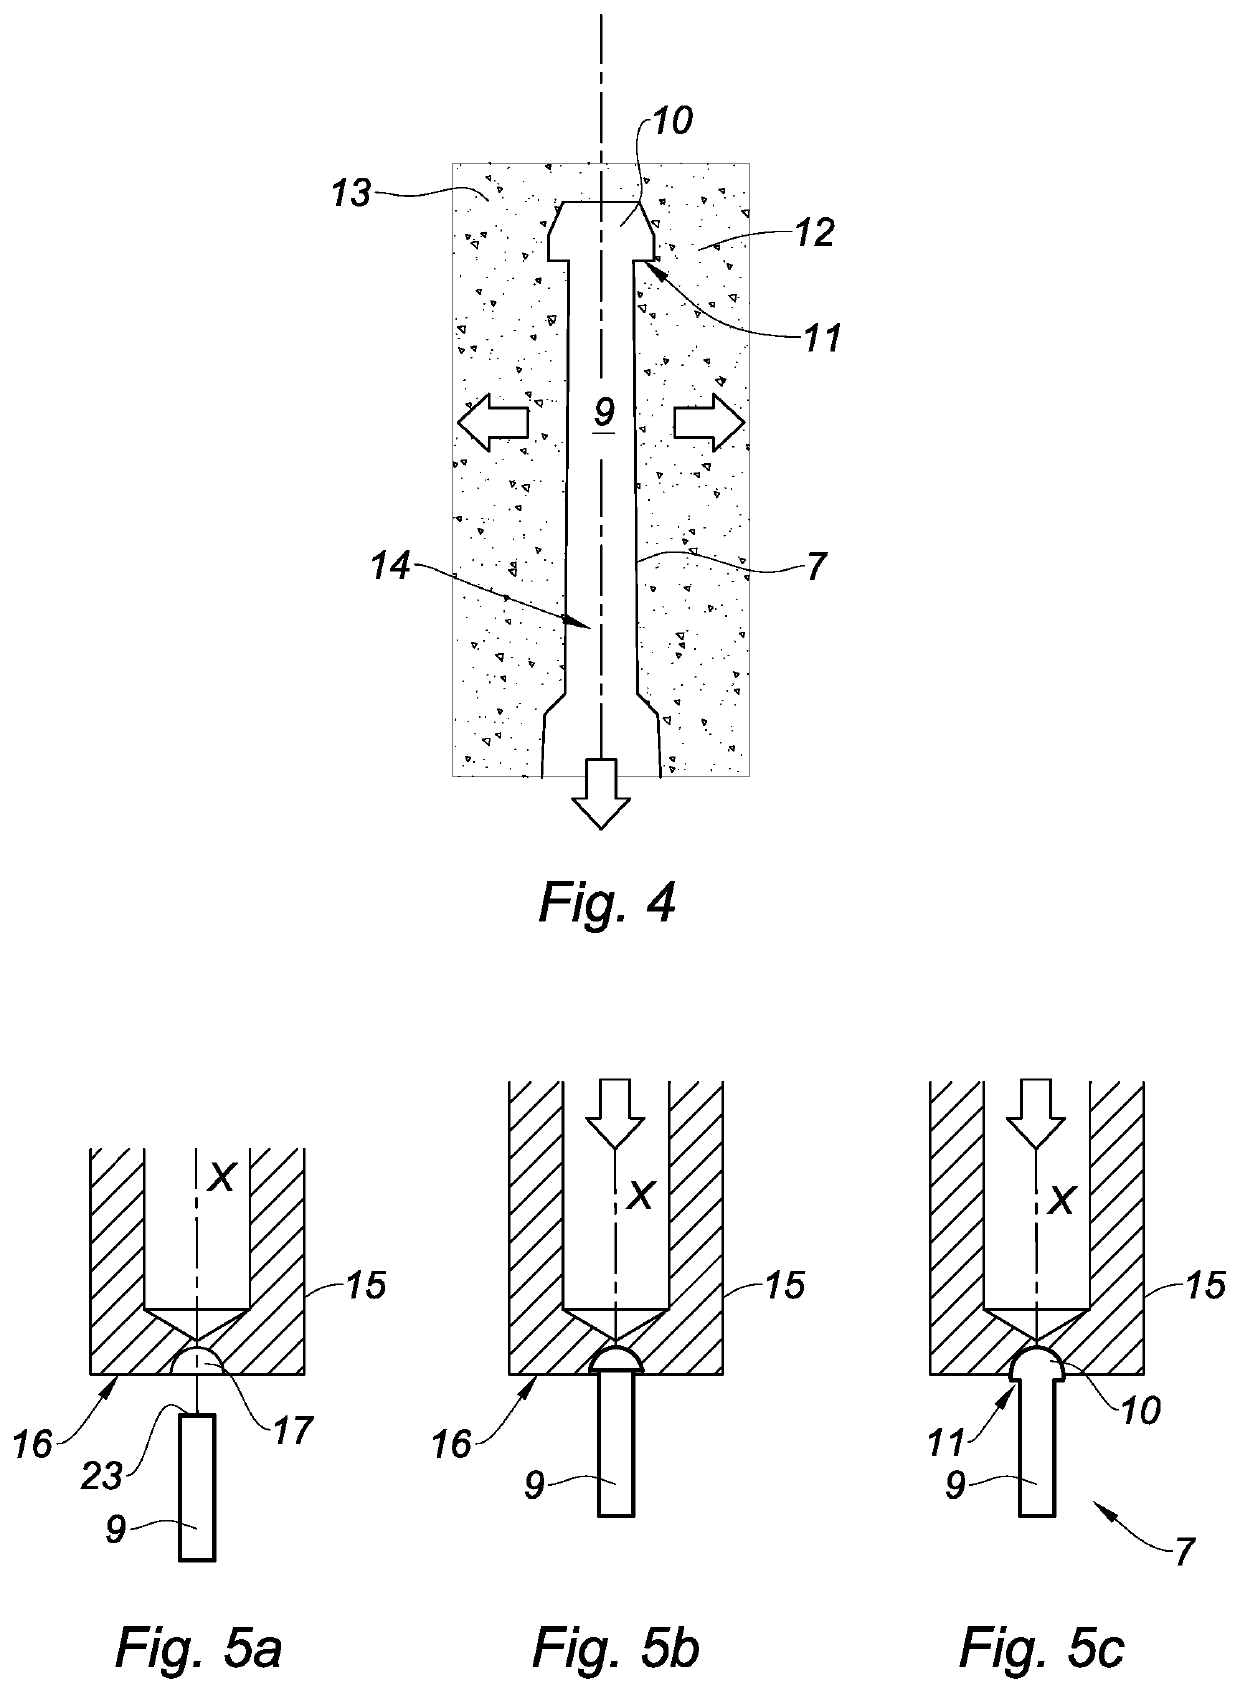 Method for producing a guiding rod for a pump